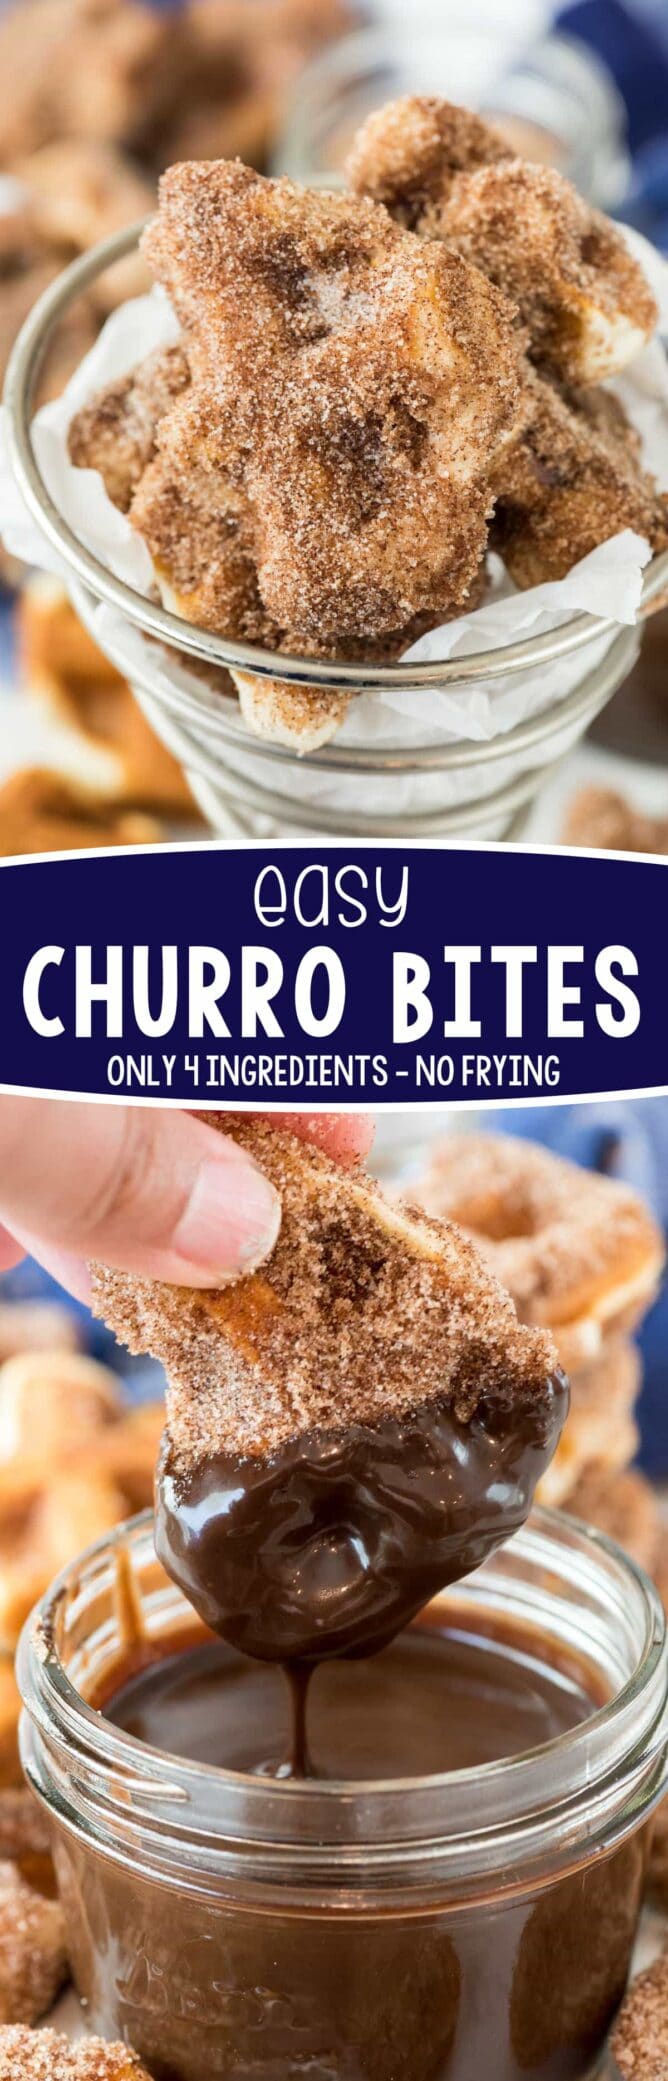 Easy churro bites photo collage with words in the middle